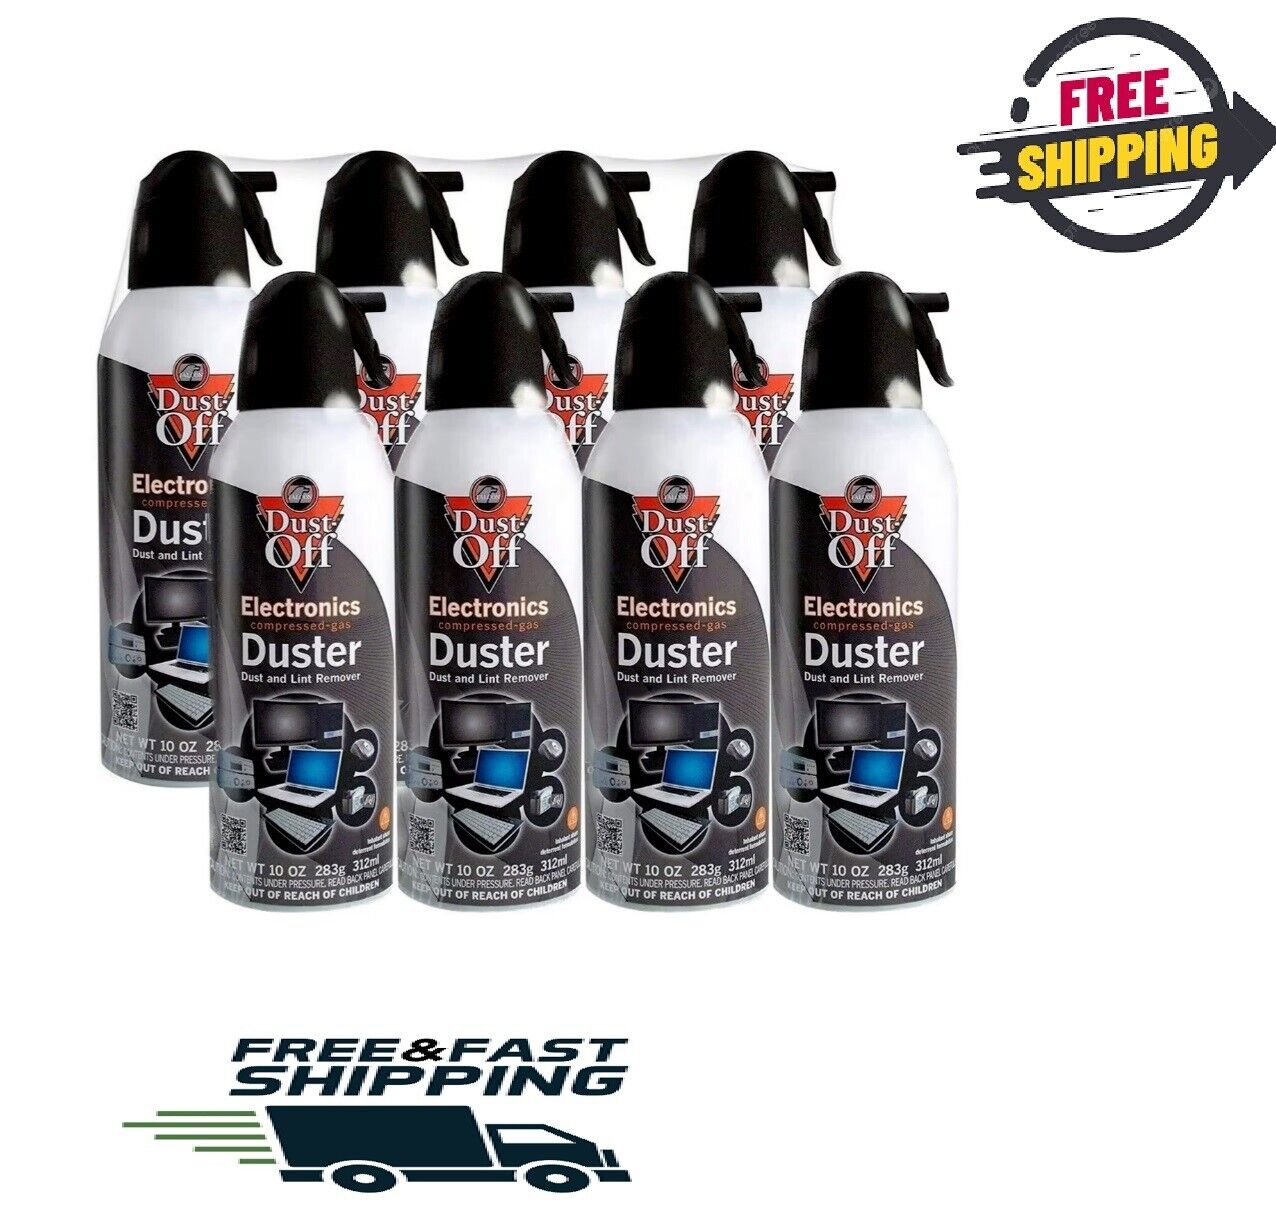 Falcon Dust-Off Compressed Gas Duster (10oz., 8 Pack). 